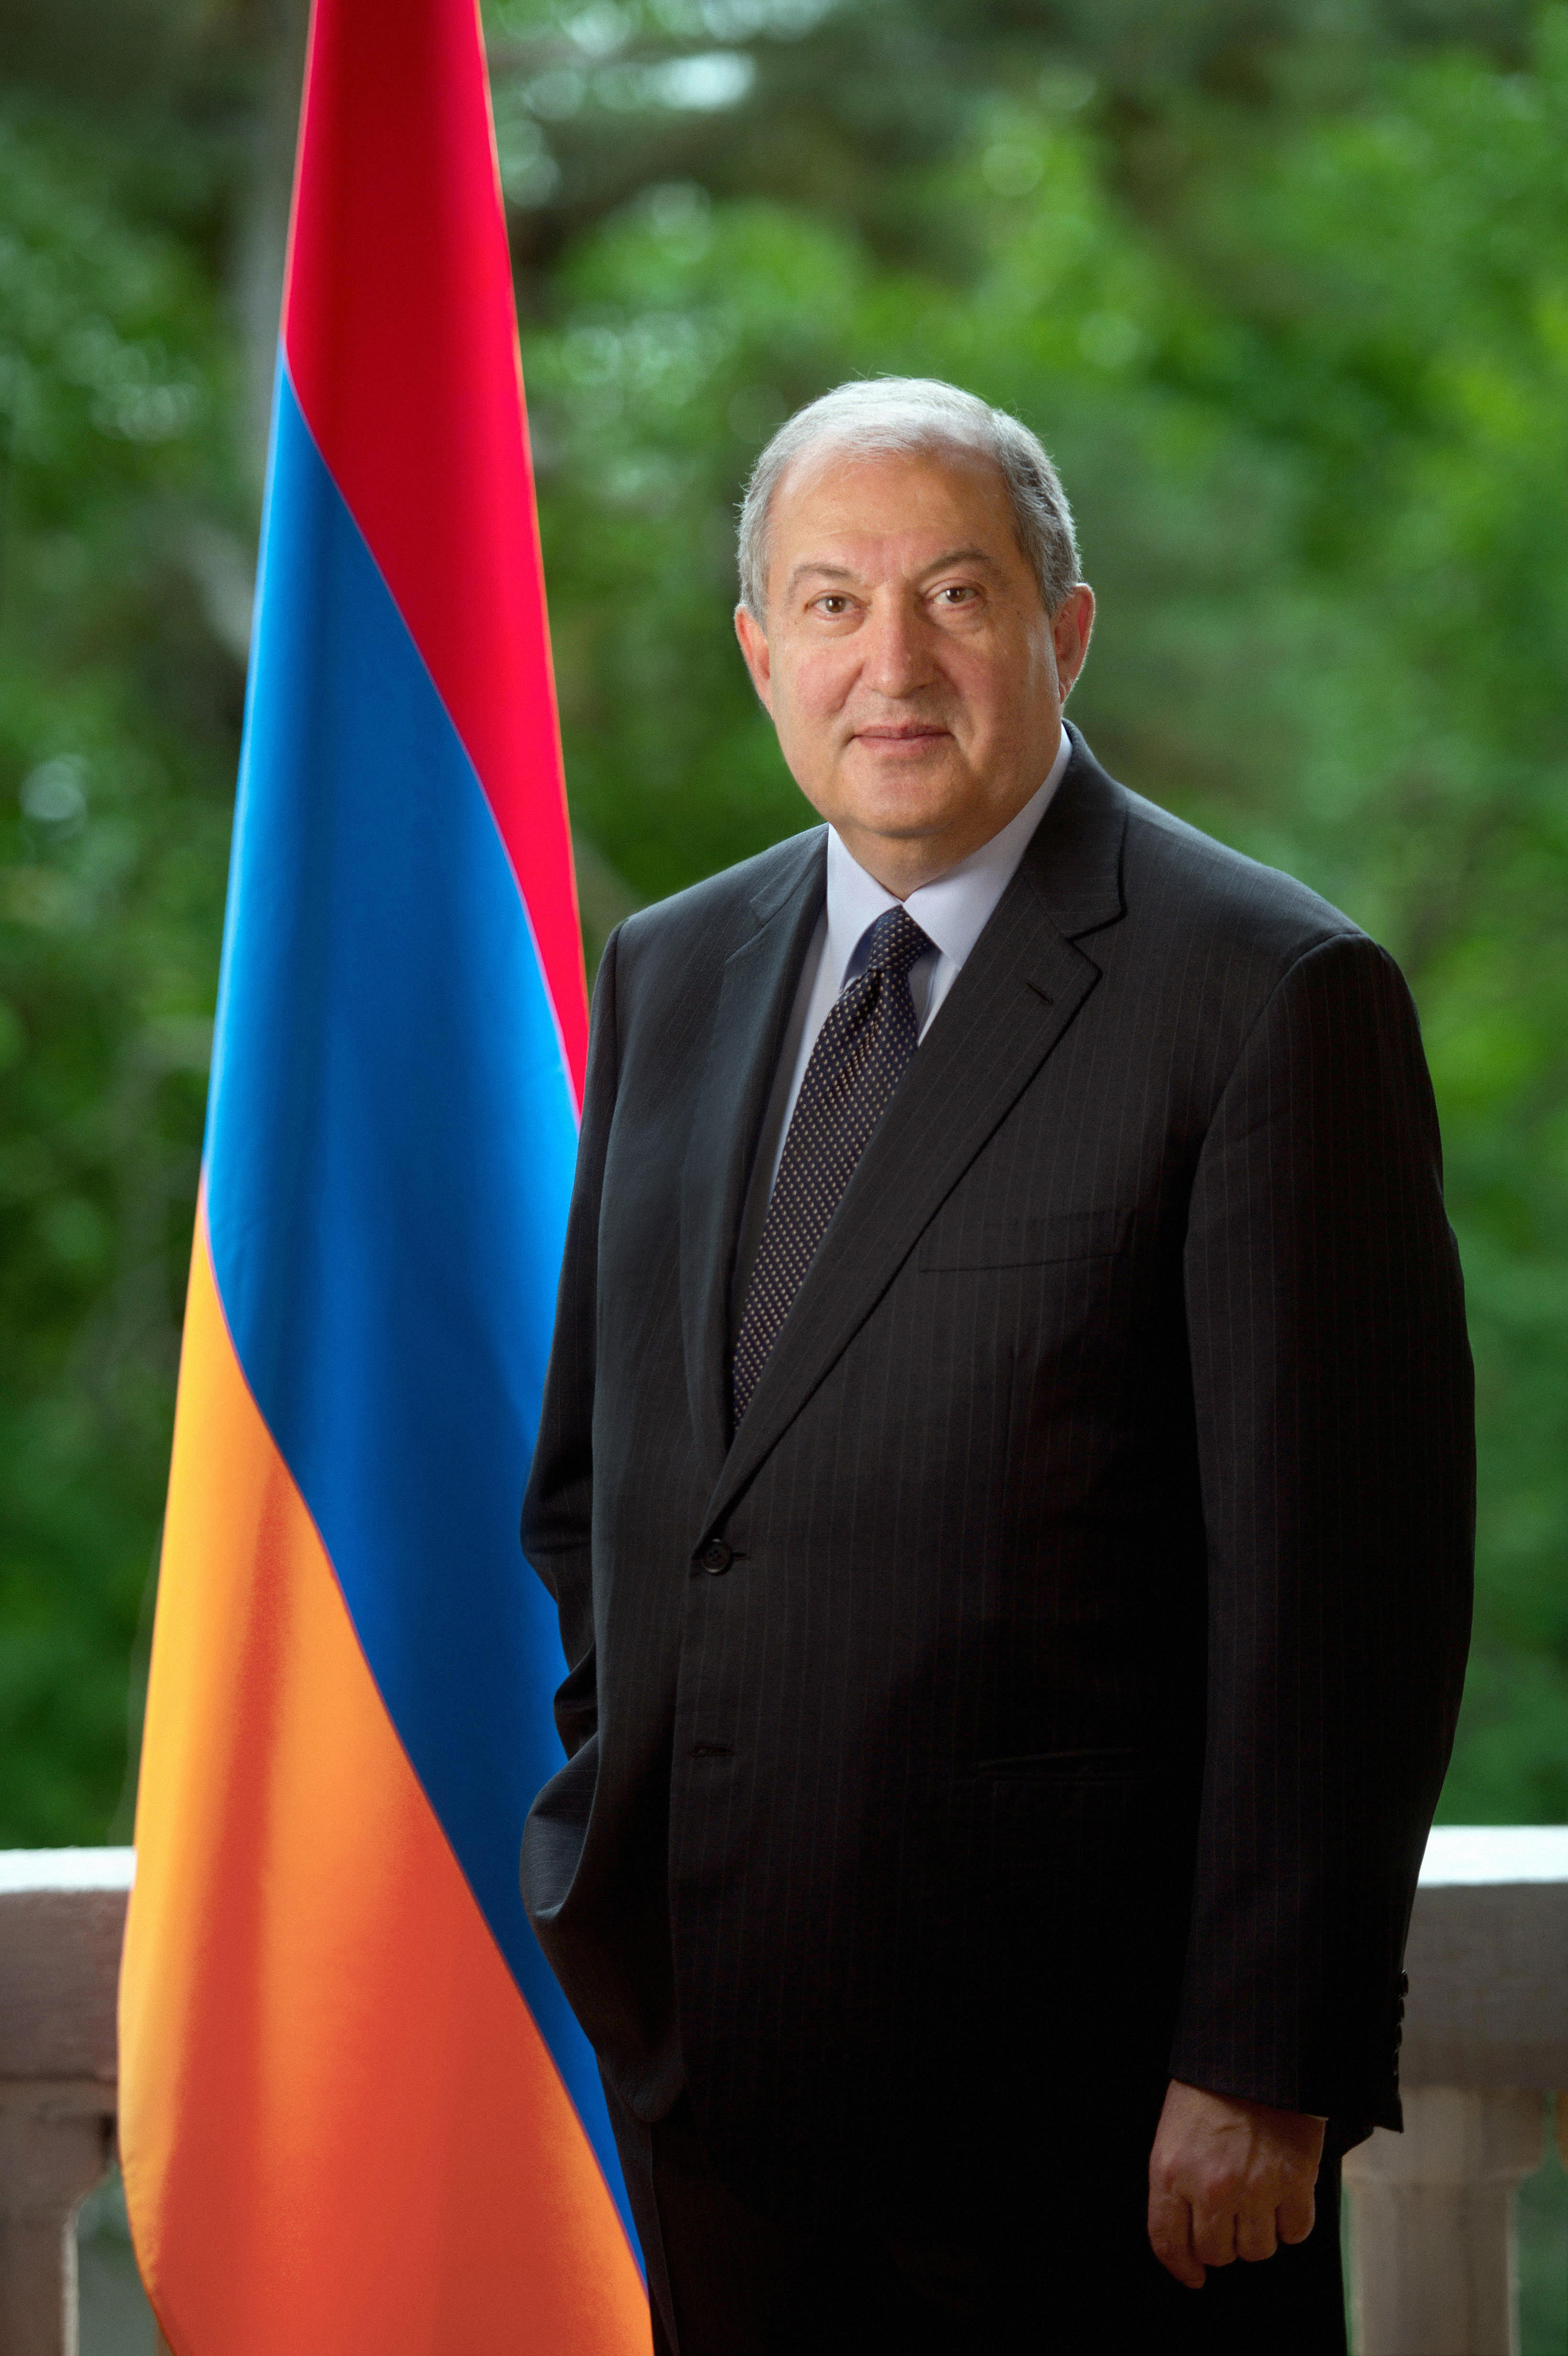 Armenian President is confident that the current situation must be settled in the framework of Constitution and laws